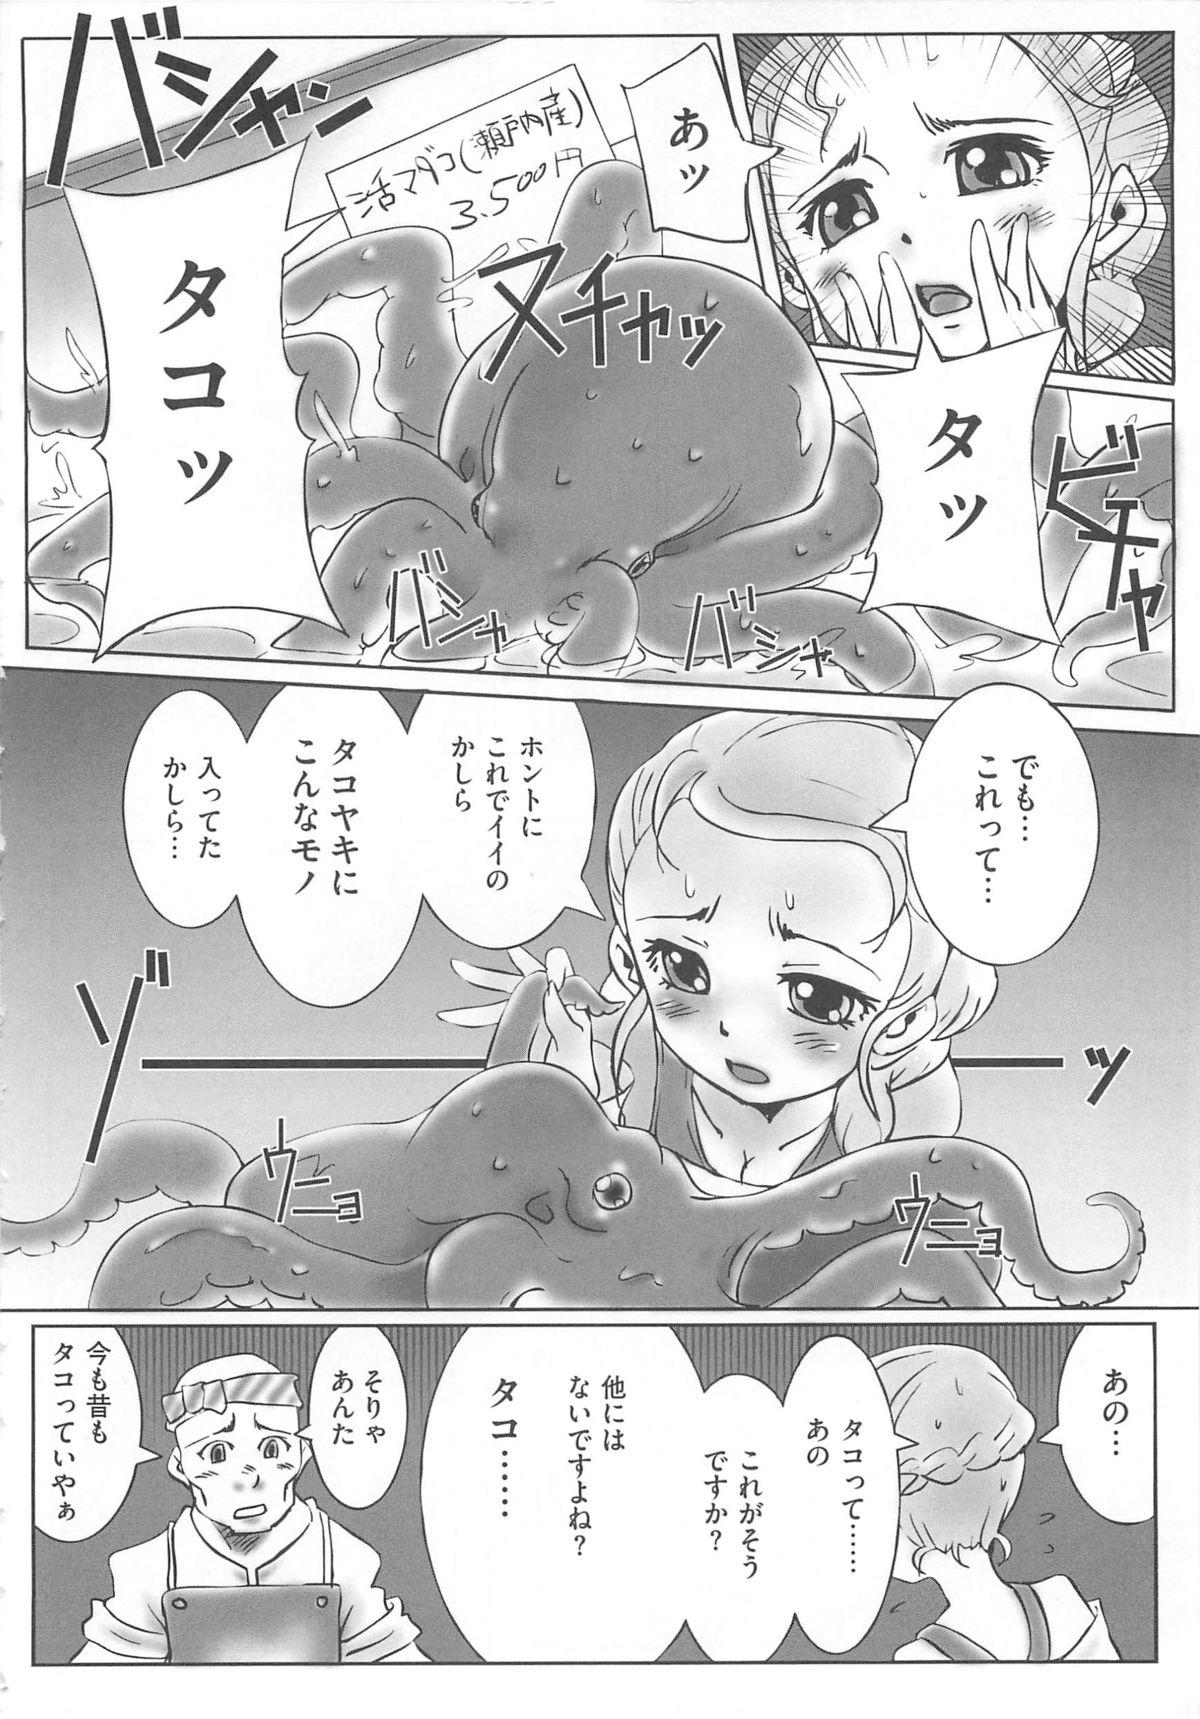 First Time Erocure MAX - Futacure Max H - Pretty cure Thylinh - Page 9